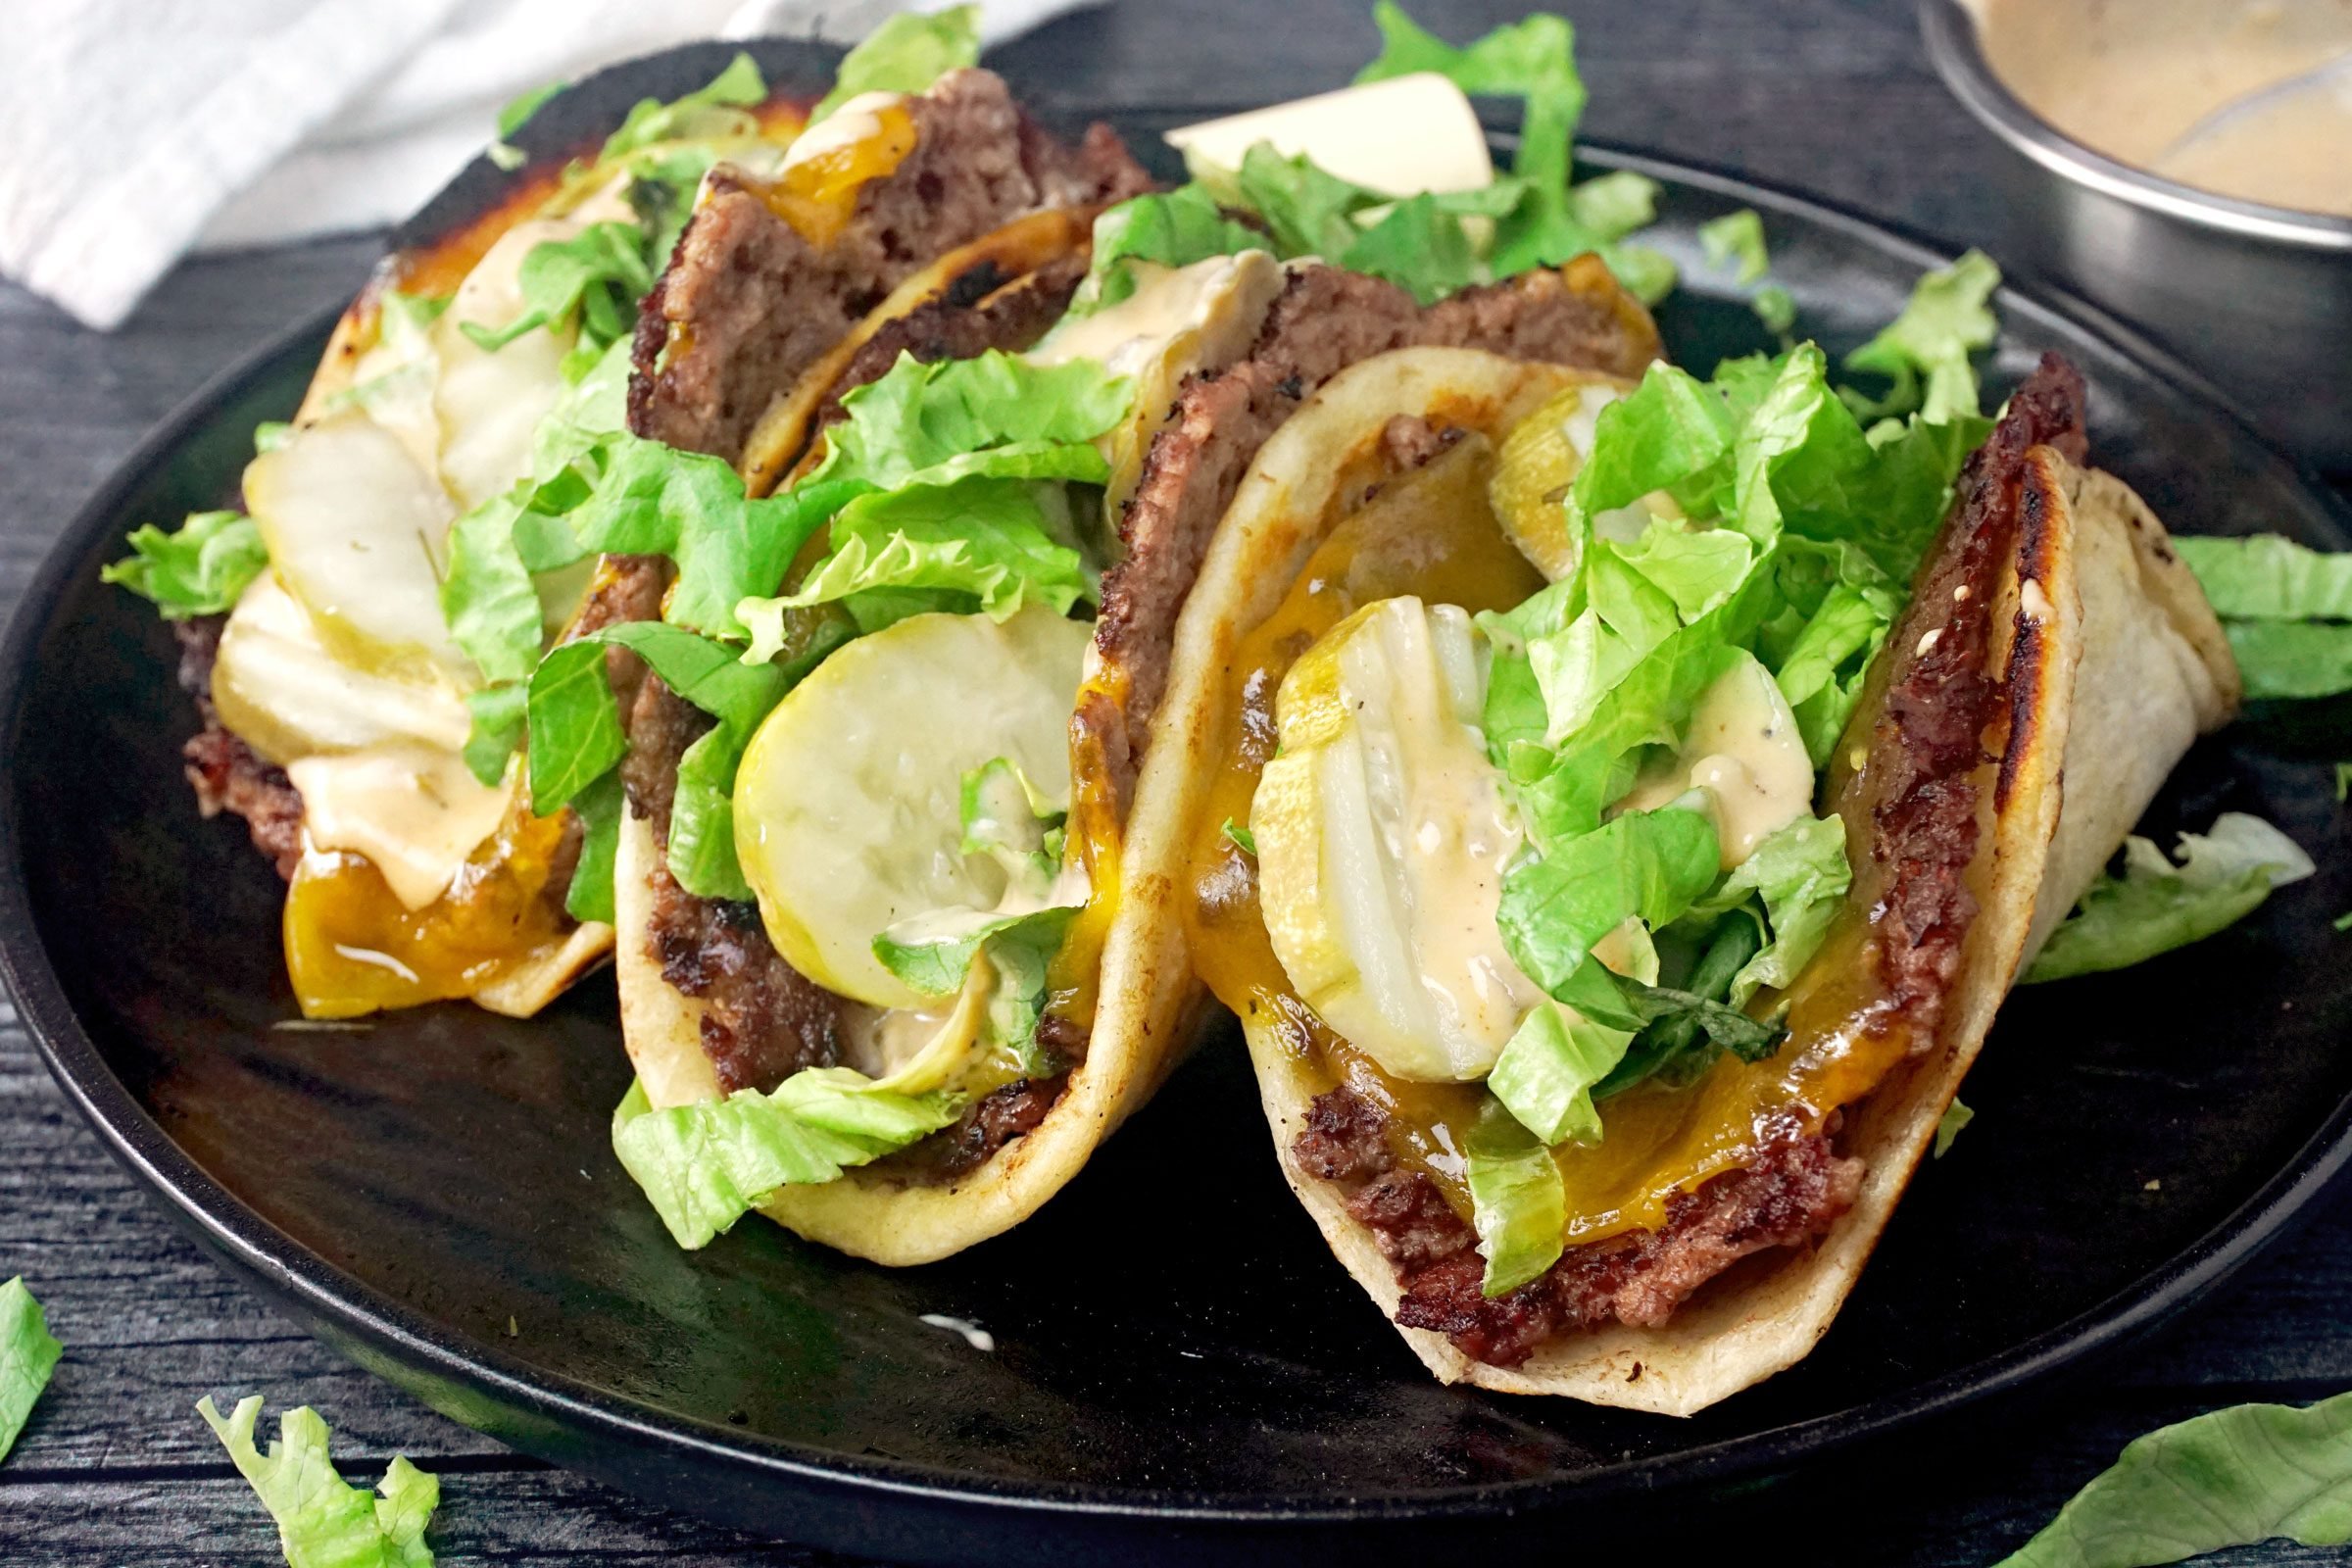 This recipe for viral tortilla smash burgers tastes like In-N-Out